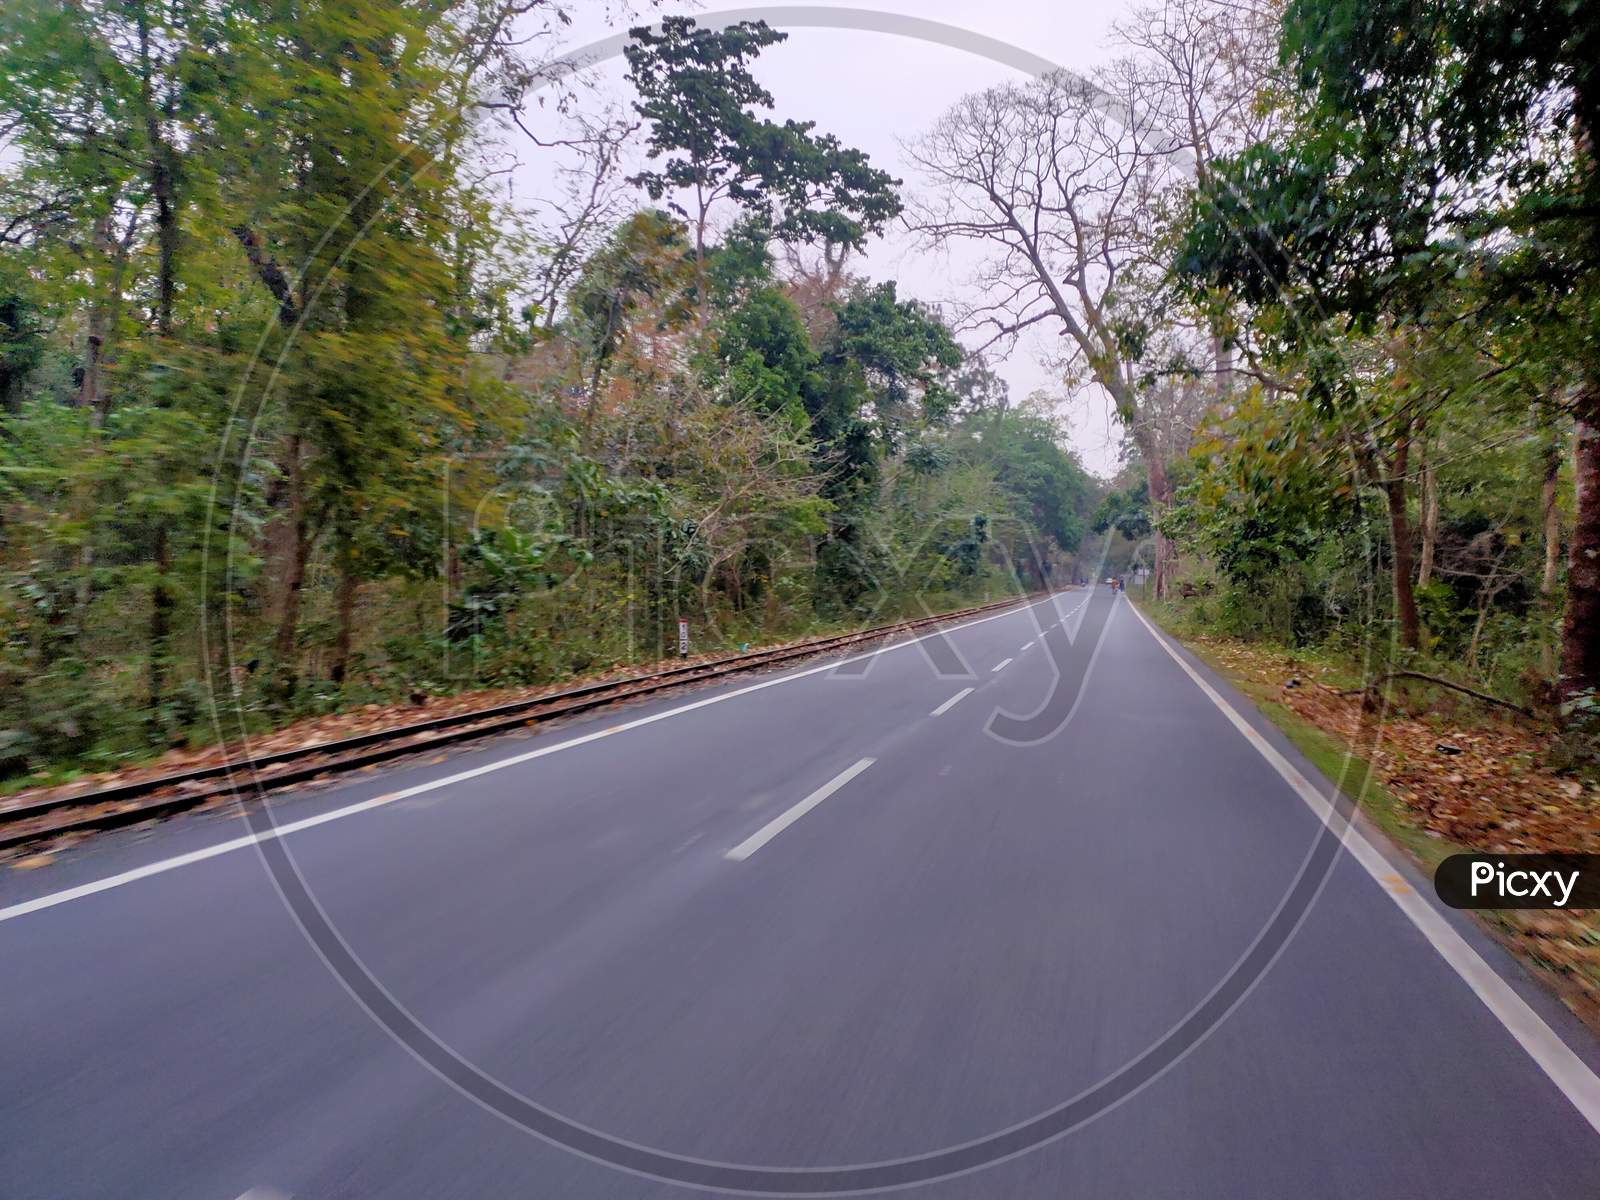 Lonly road